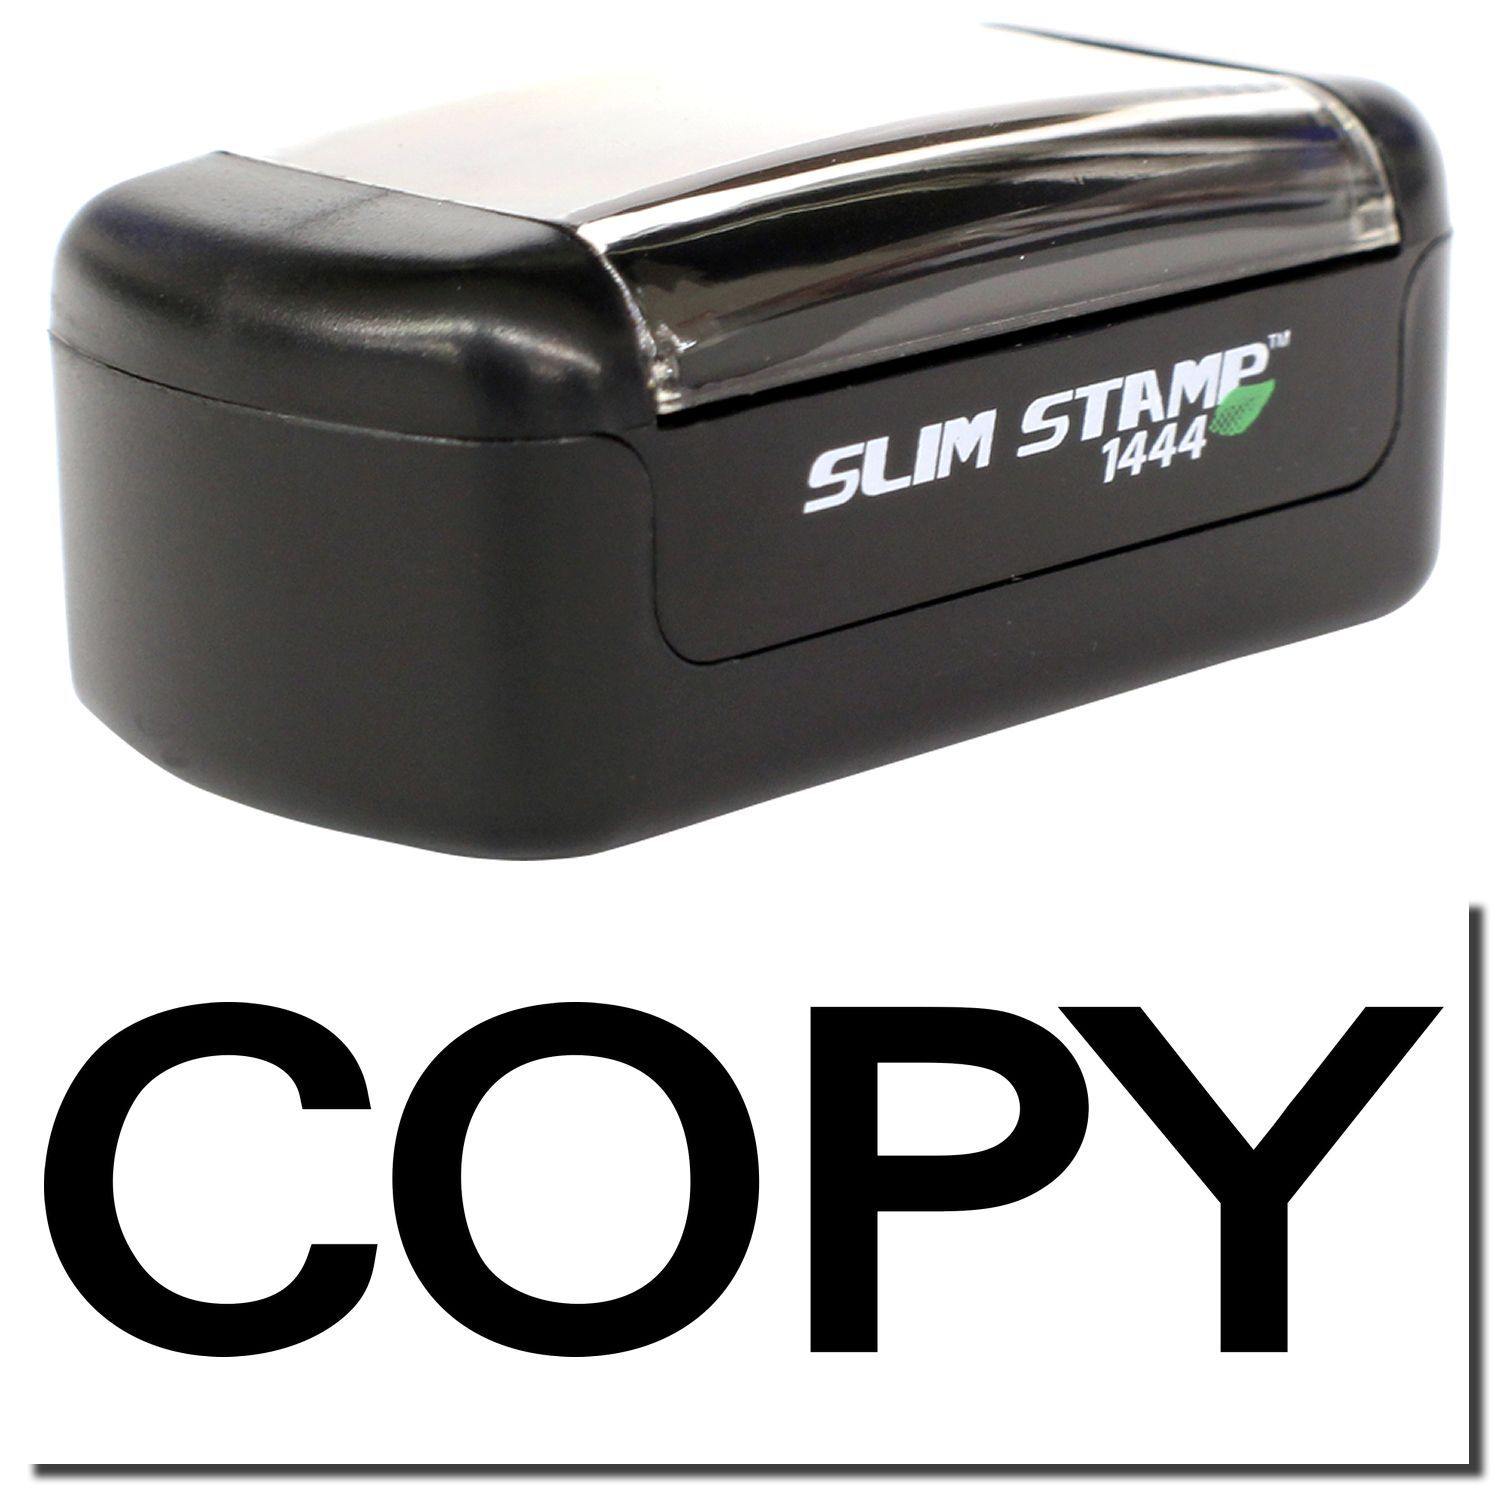 A stock office pre-inked stamp with a stamped image showing how the text "COPY" in bold font is displayed after stamping.